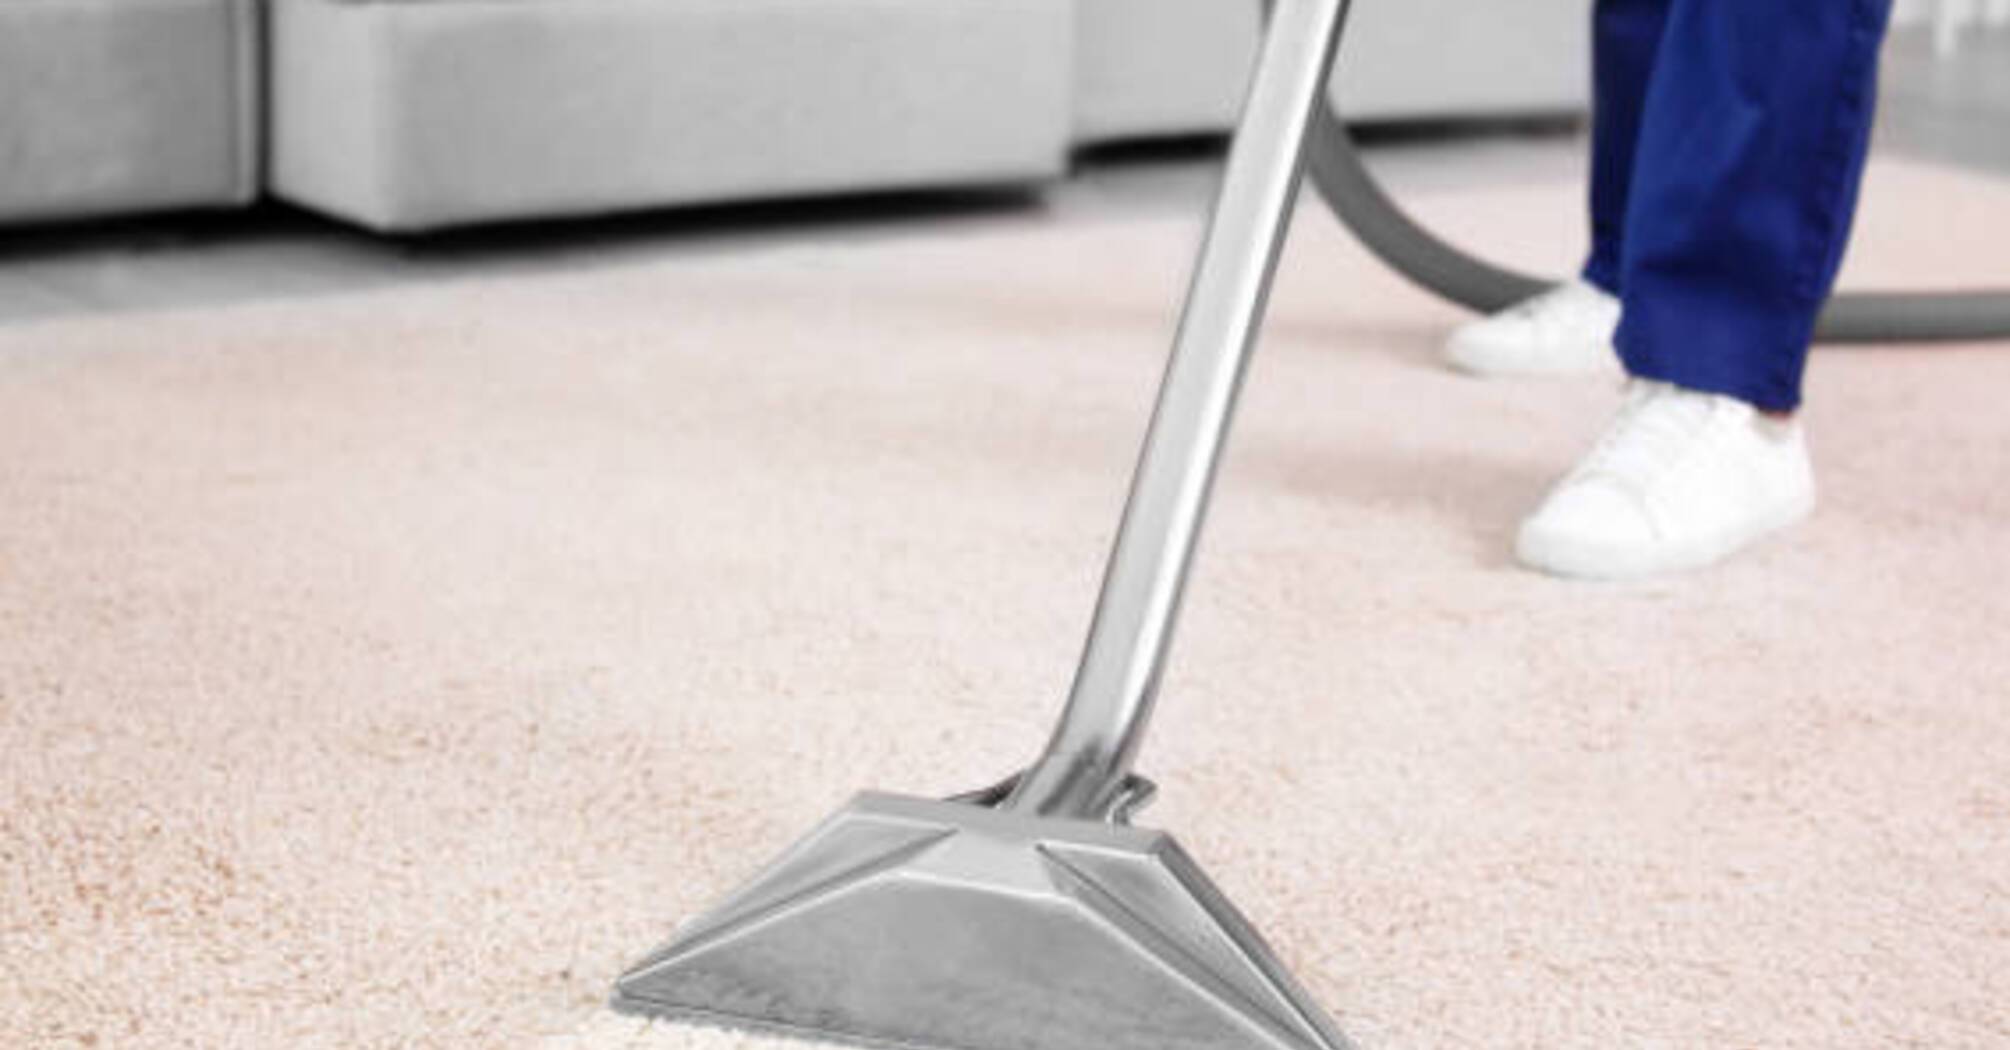 How to clean a carpet without dry cleaning: 3 effective life hacks